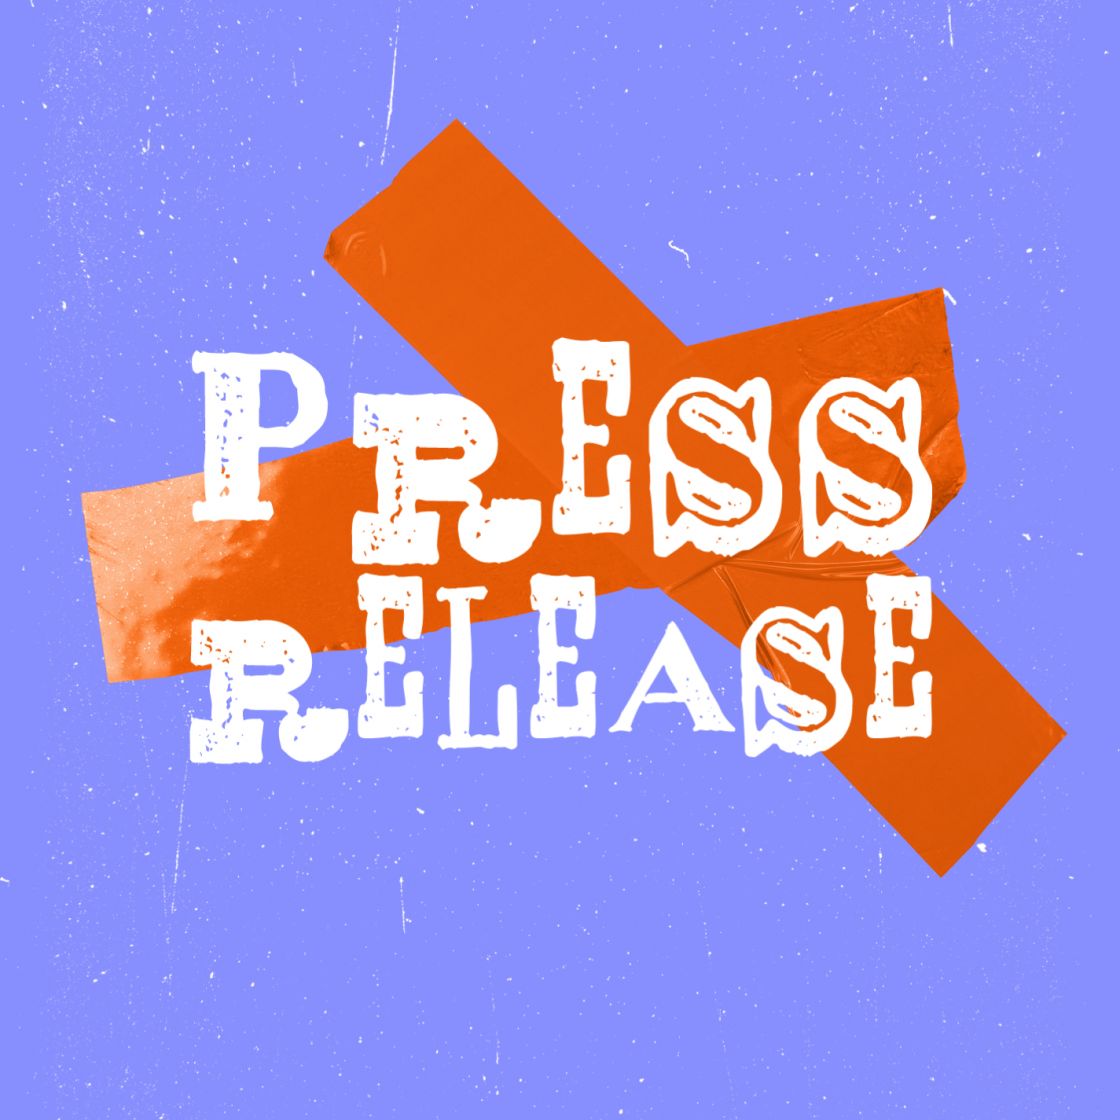 Writing A Press Release Is Easy If You Follow These Steps